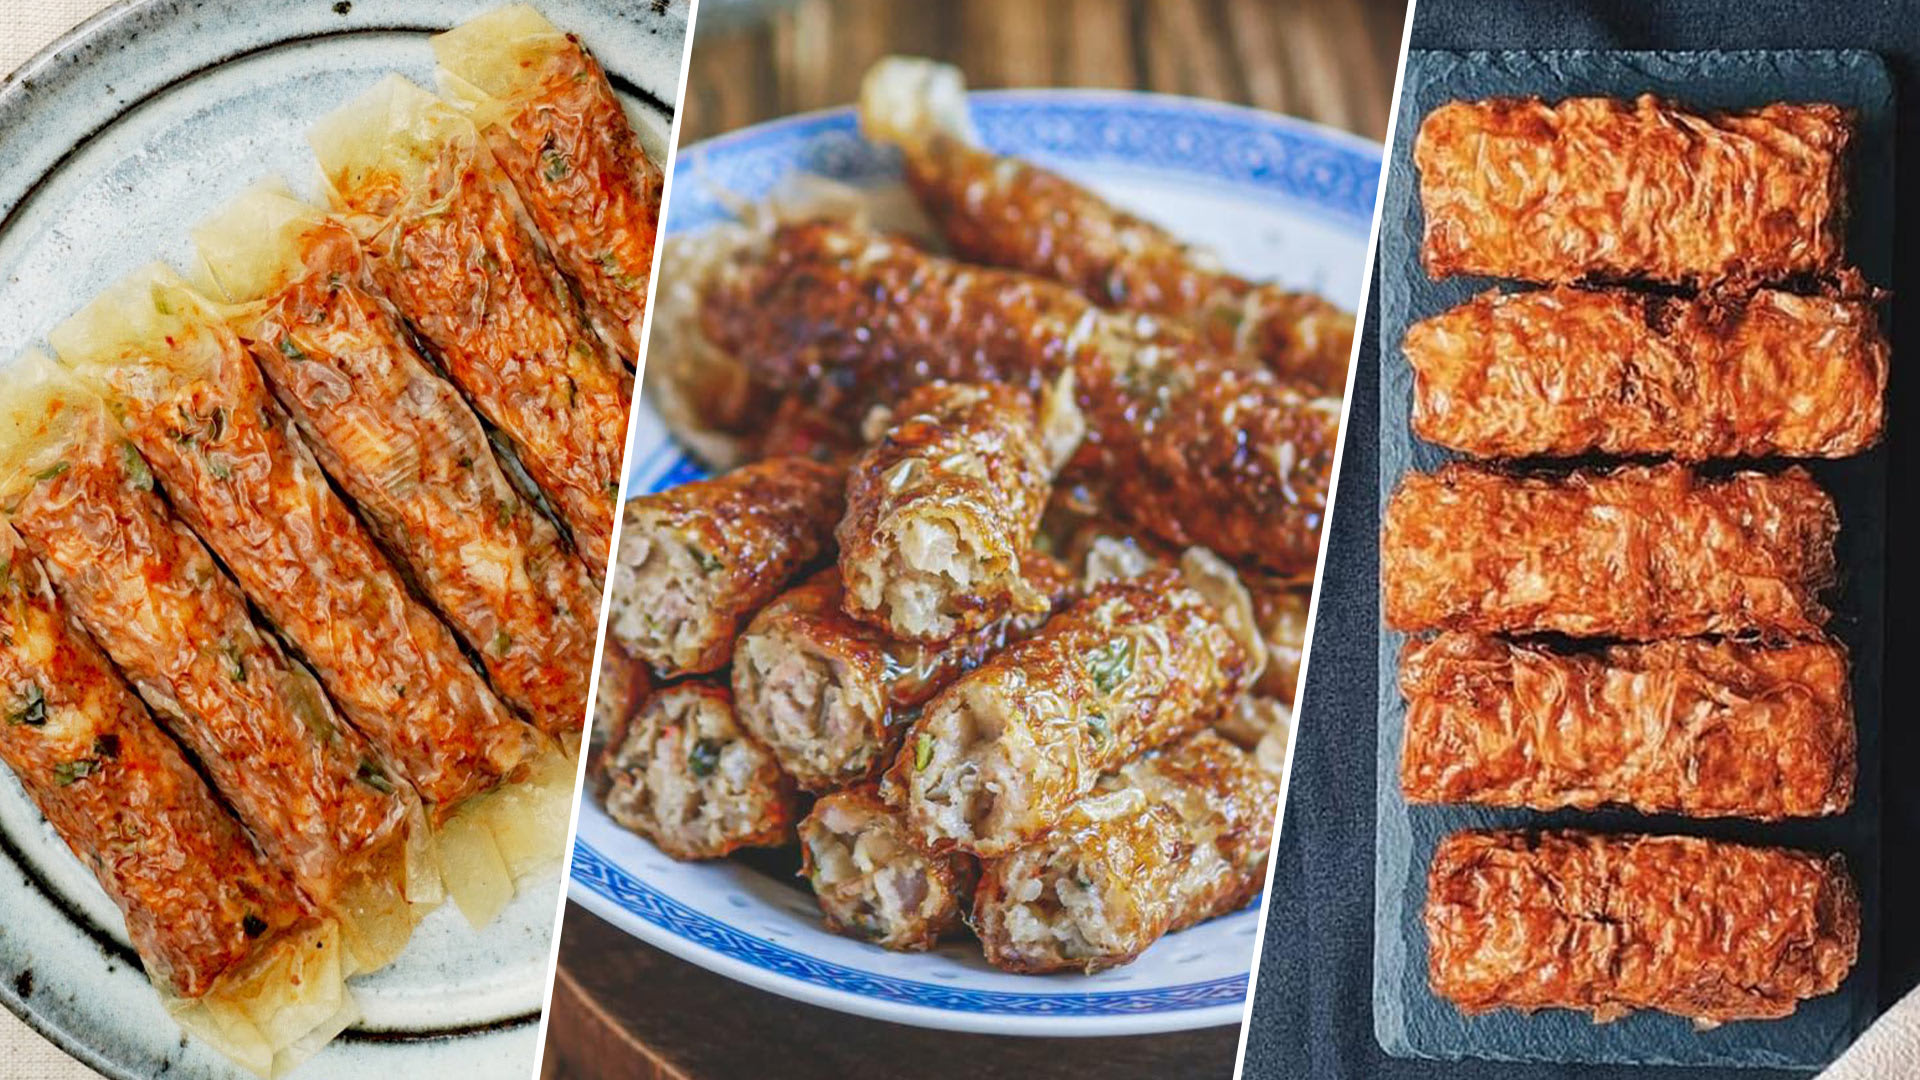 11 Ngoh Hiangs From Home-Based Businesses To Try This Chinese New Year